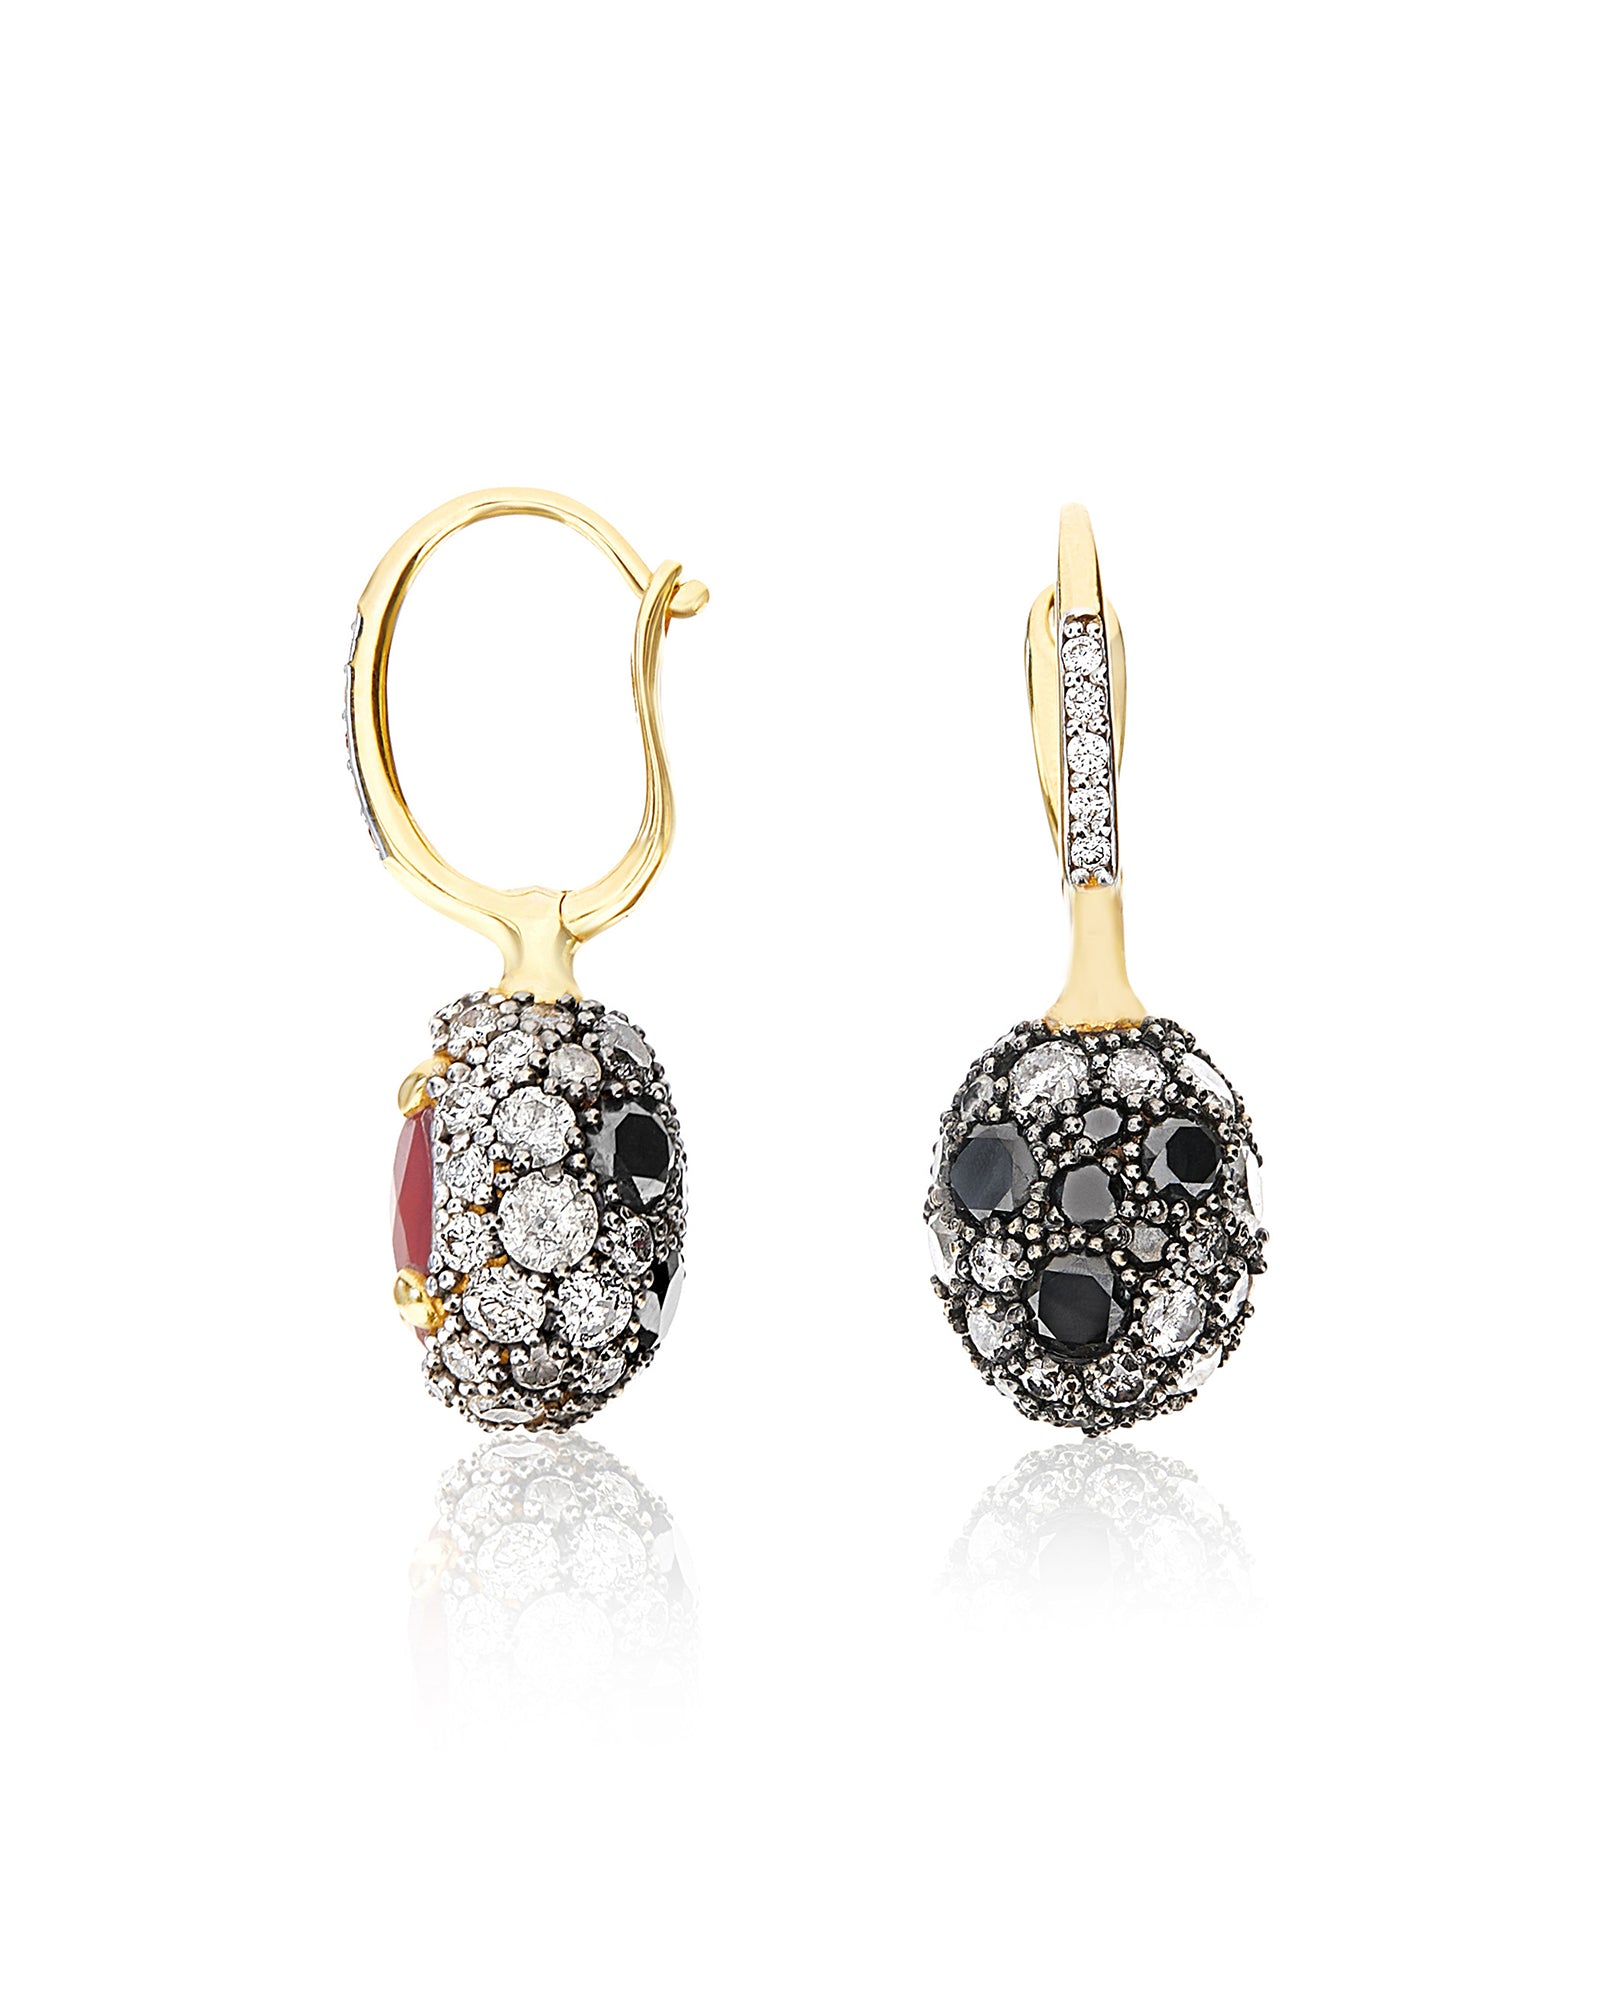 "Reverse" Ciliegine Gold, Diamonds, Rubies and Rock Crystal Double-face Ball Drop earring (SMALL)